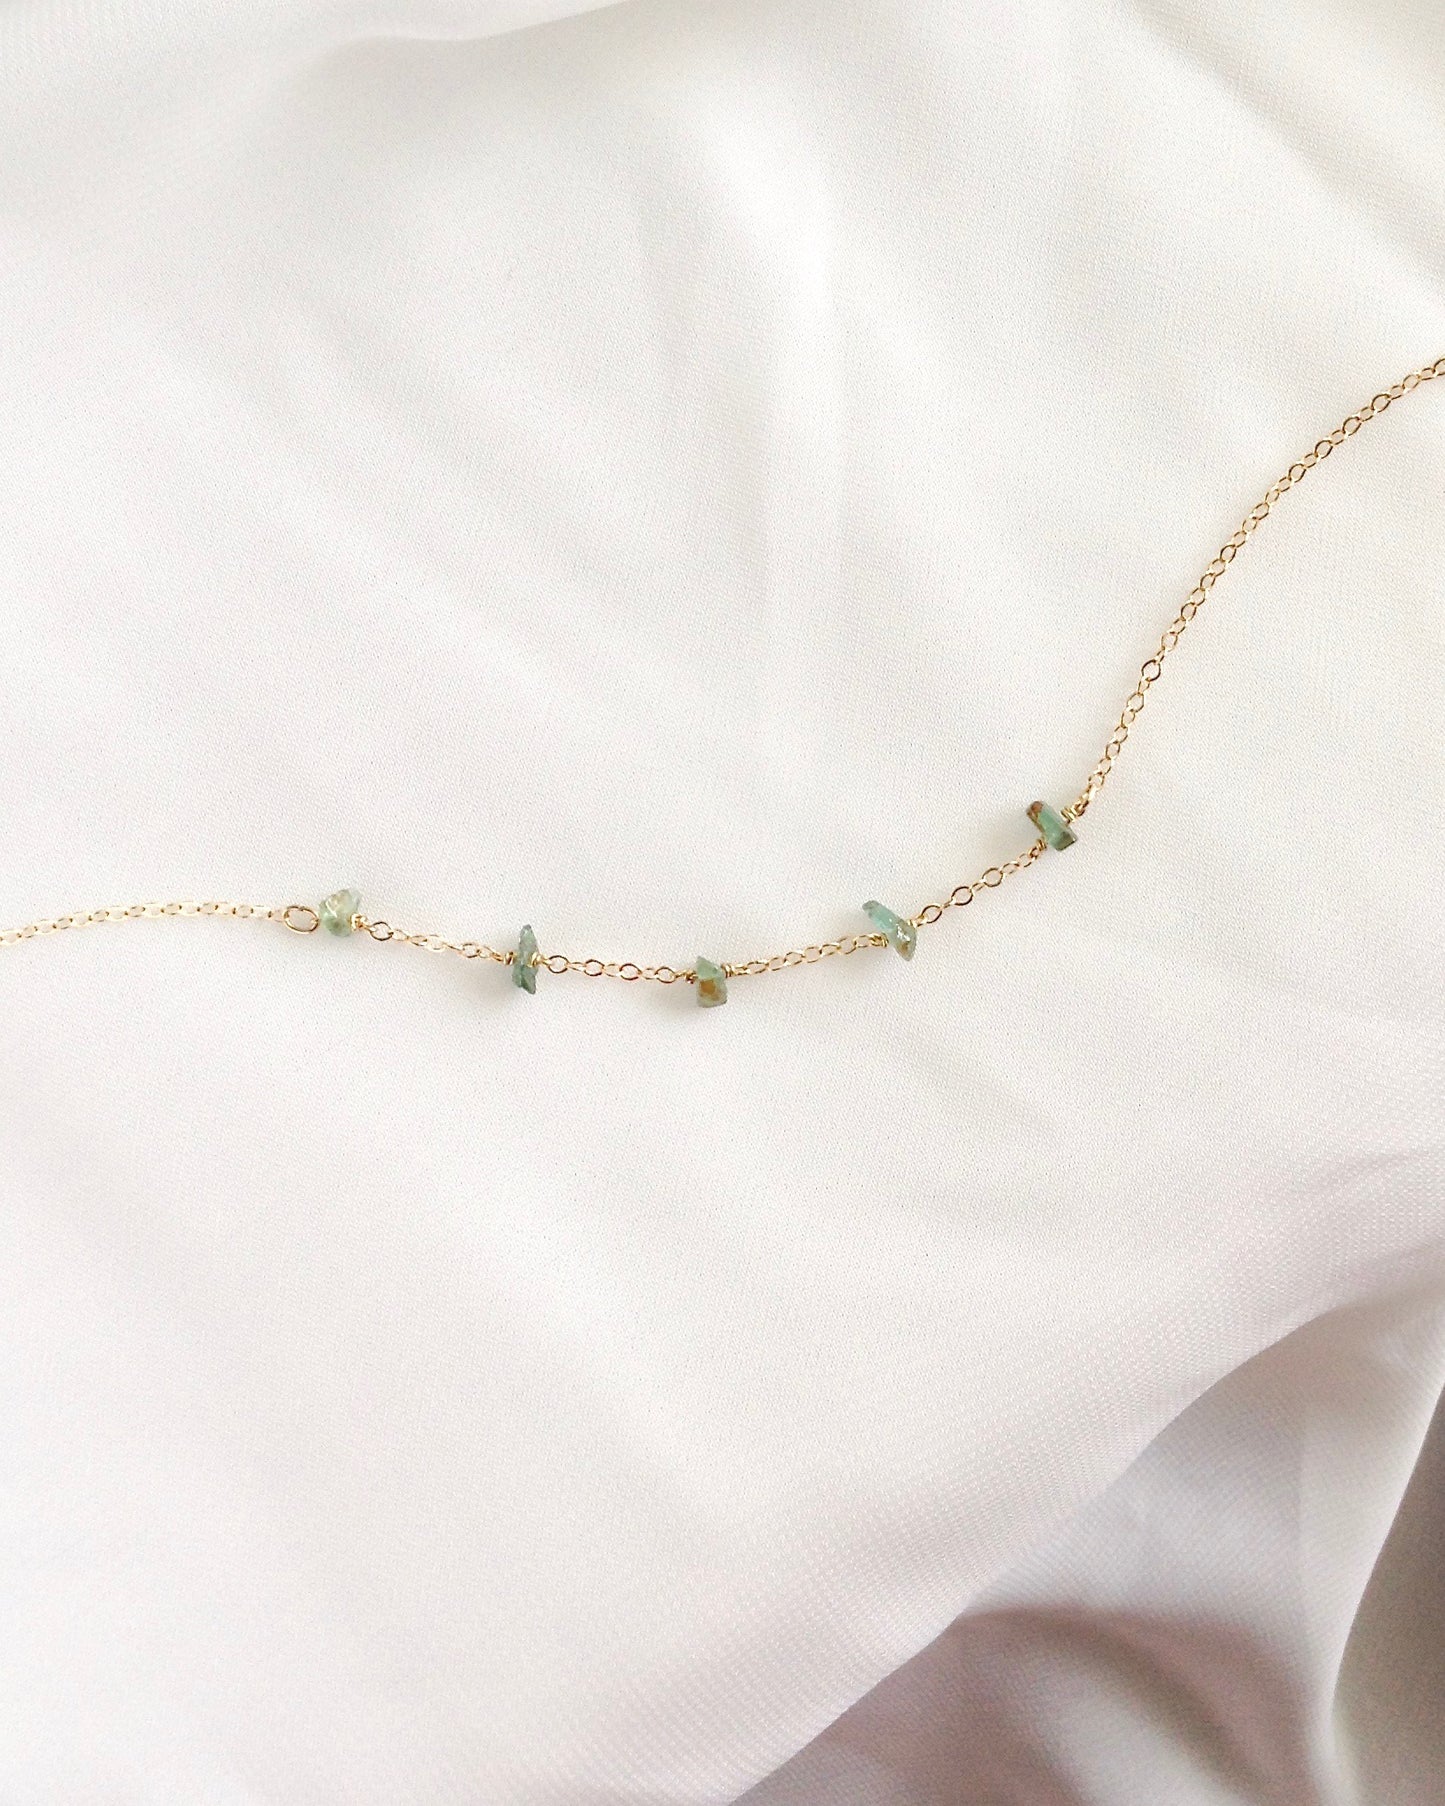 Emerald Raw Stone Bracelet In Gold Filled or Sterling Silver | IB Jewelry